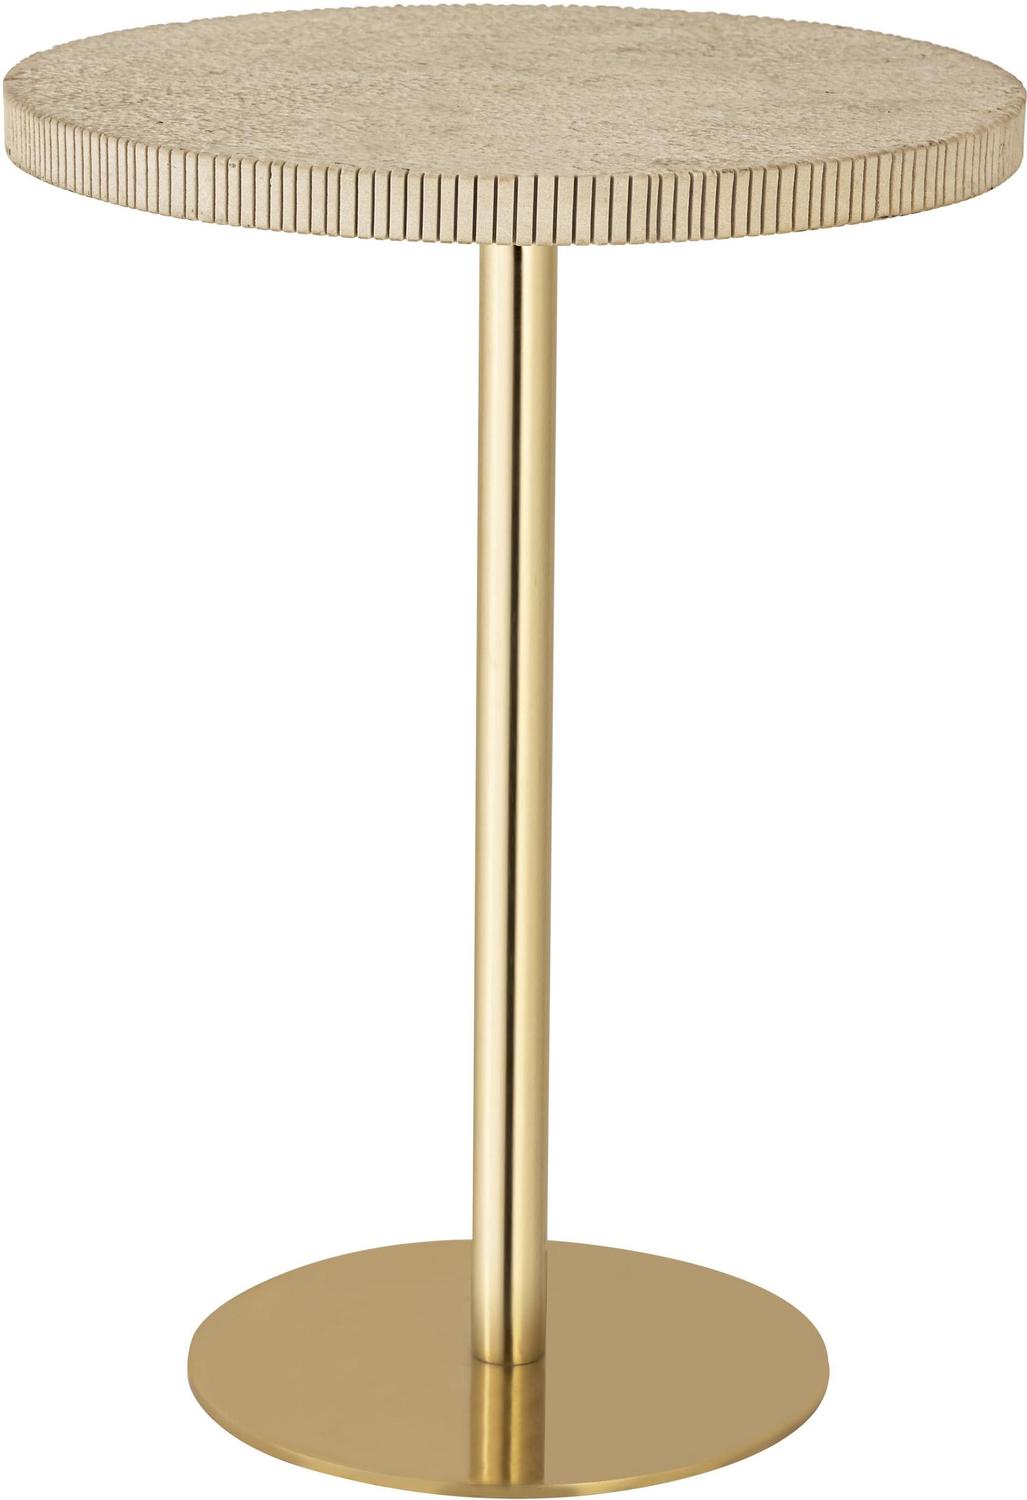 Tov Furniture Side Tables Accent Tables Gold,Natural Stone